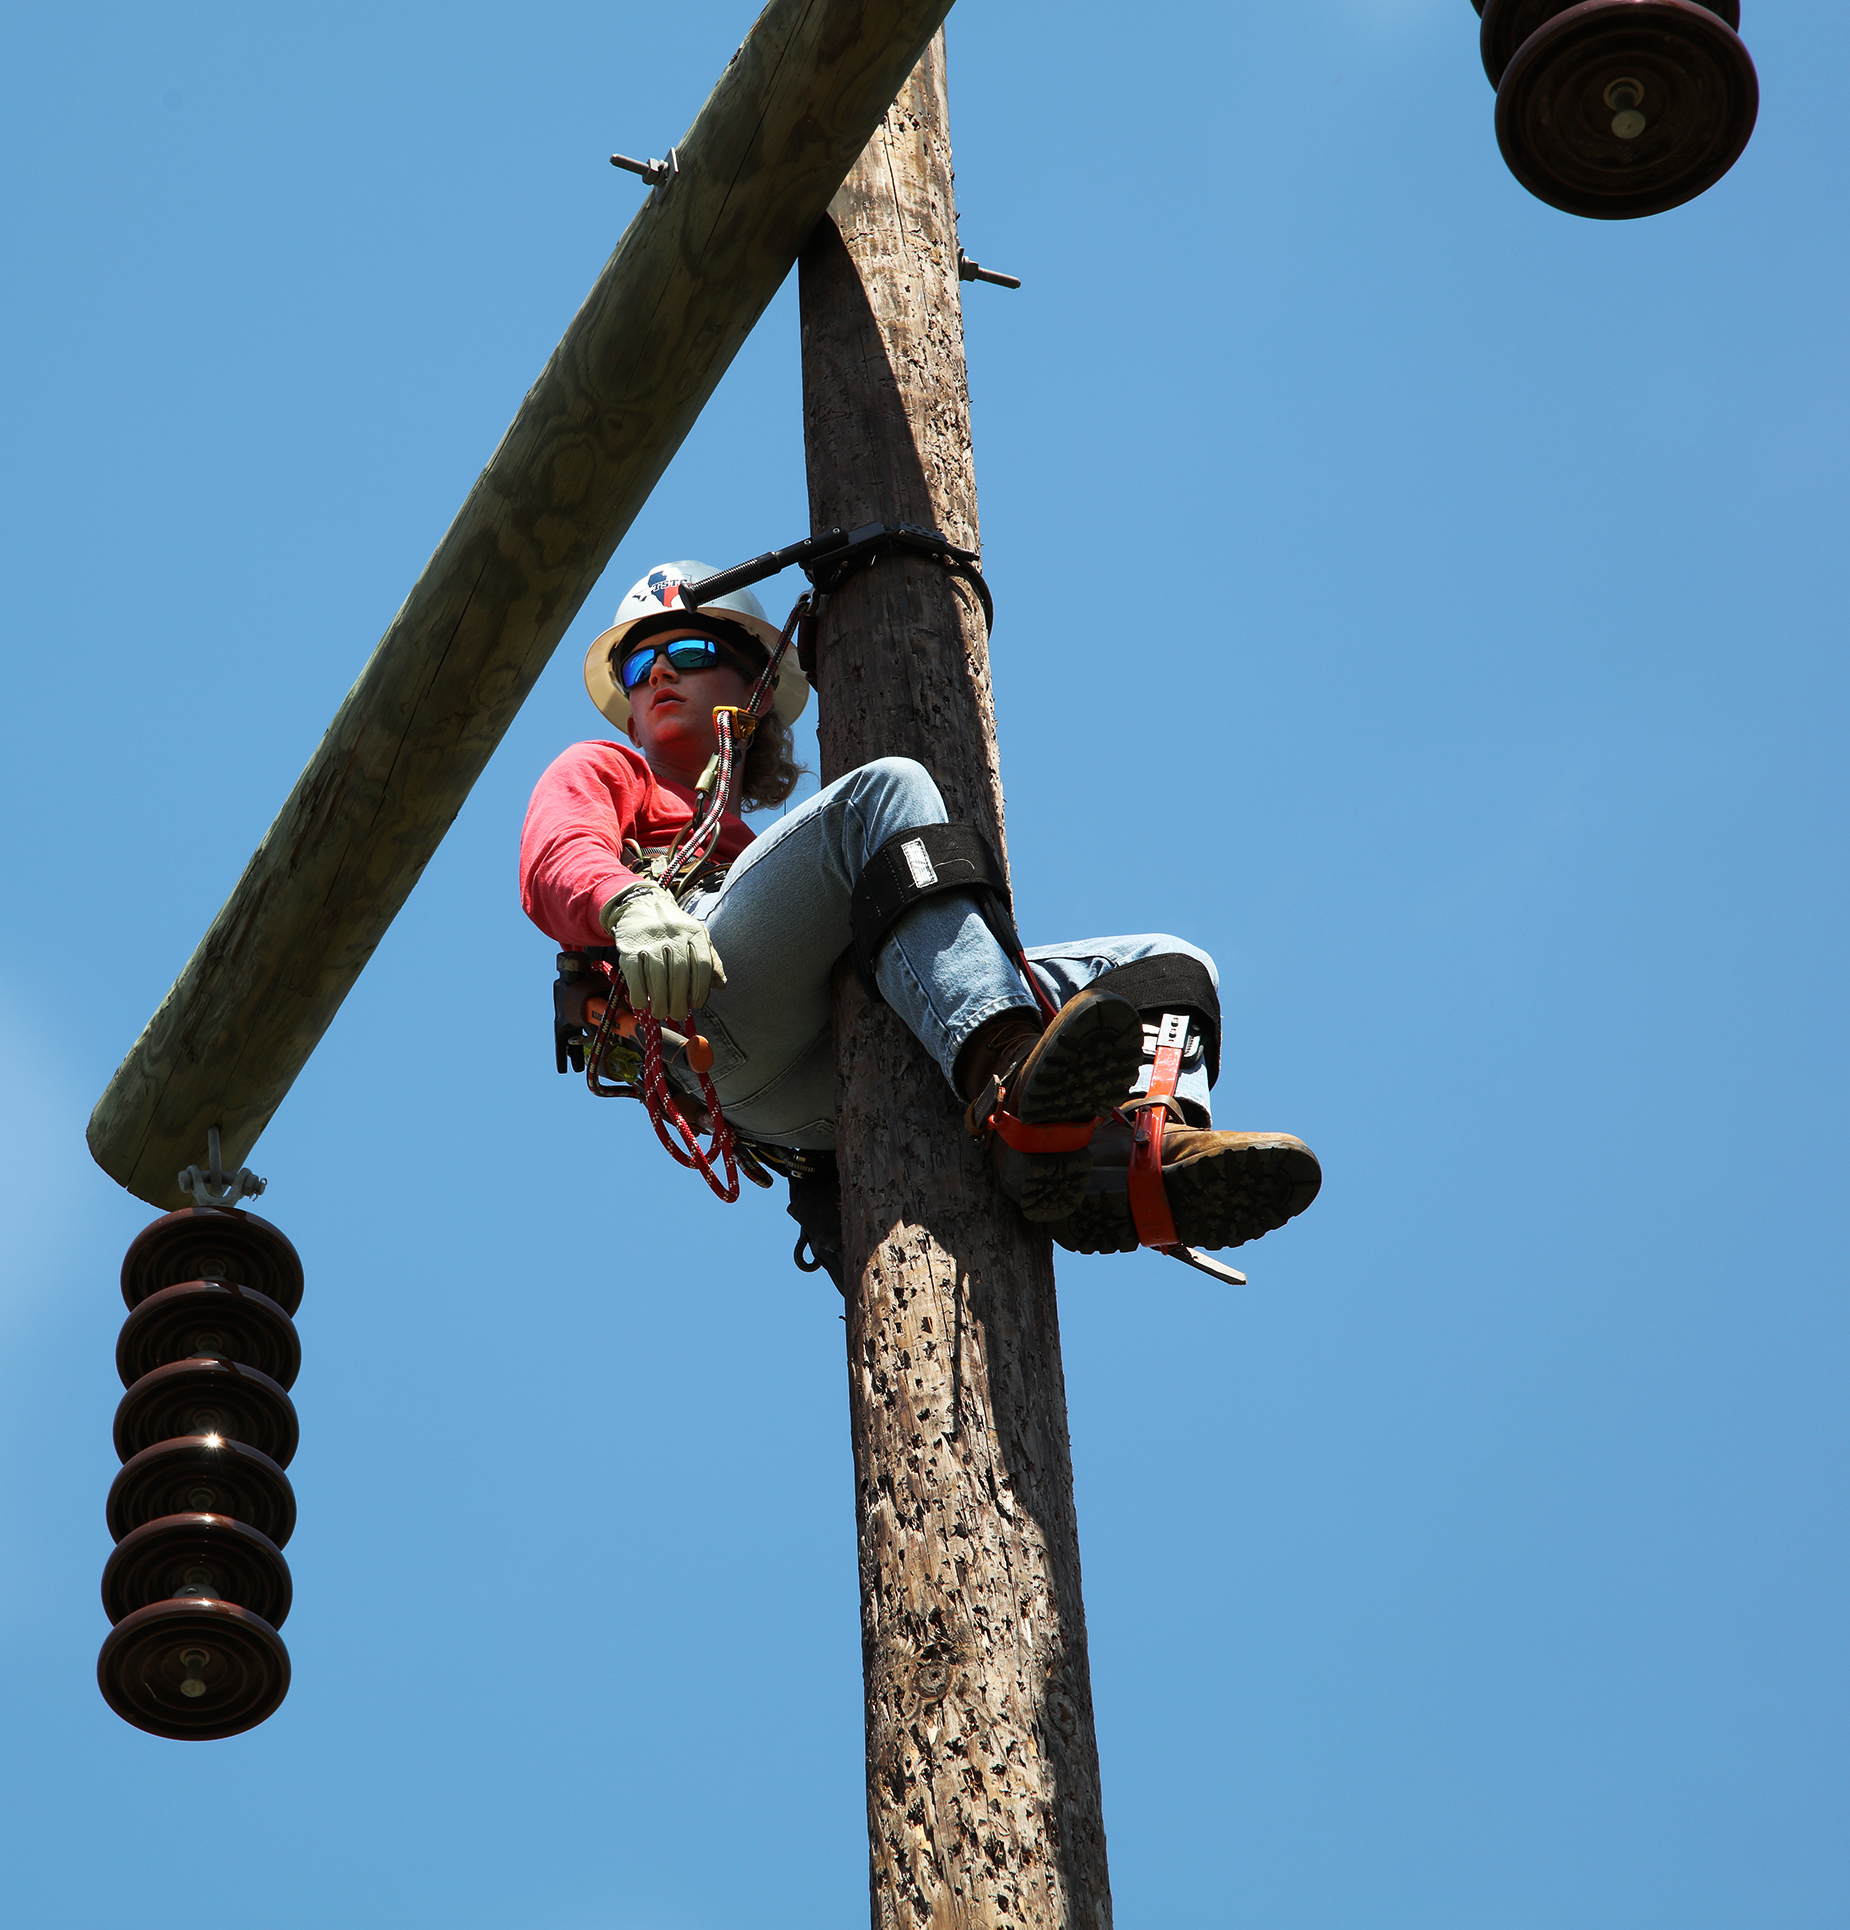 TSTC Electrical Lineworker student brings passion, work ethic to